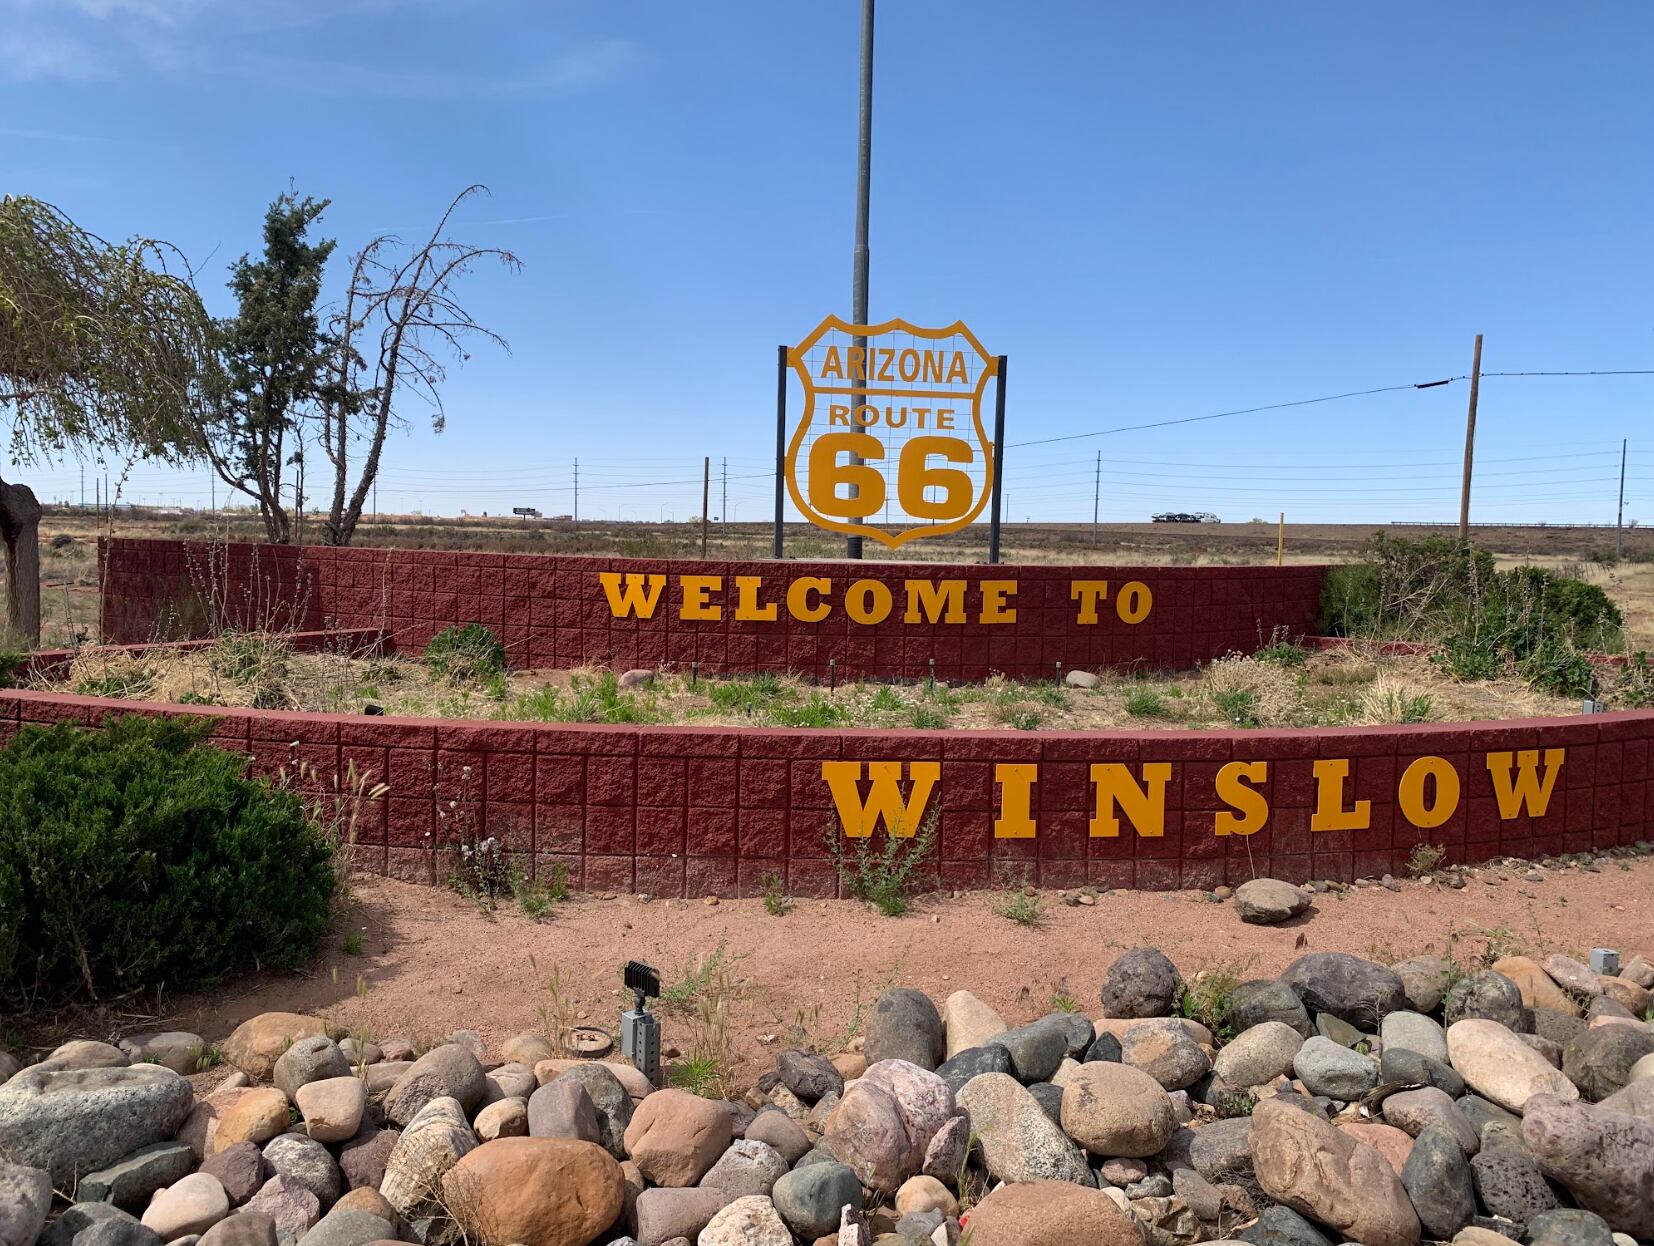 A route 66 shield welcomes guests to Winslow, AZ